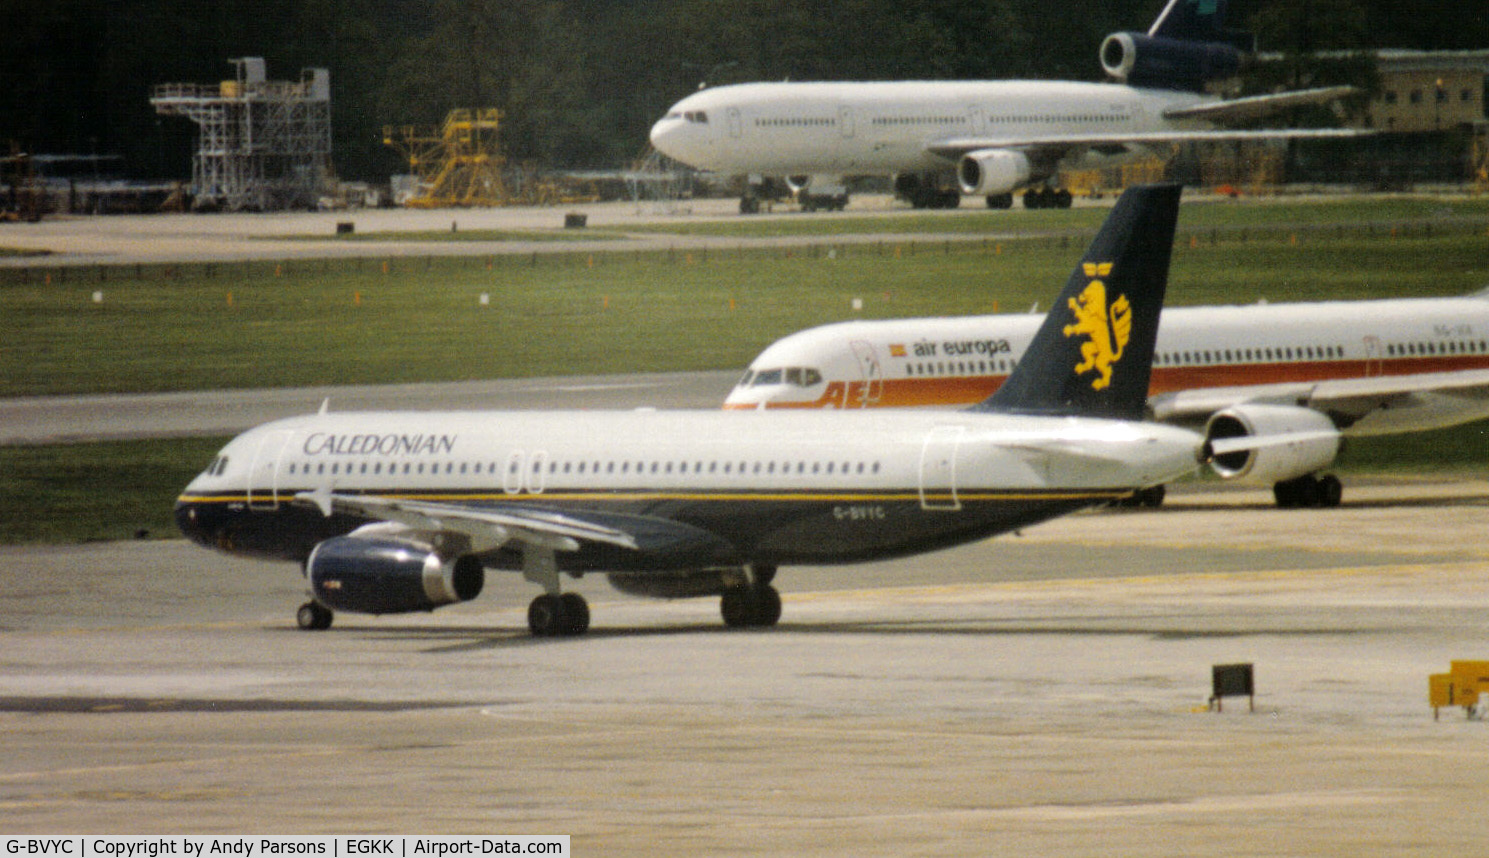 G-BVYC, 1993 Airbus A320-231 C/N 411, Sorry about the quality but a scanned print and not a good one